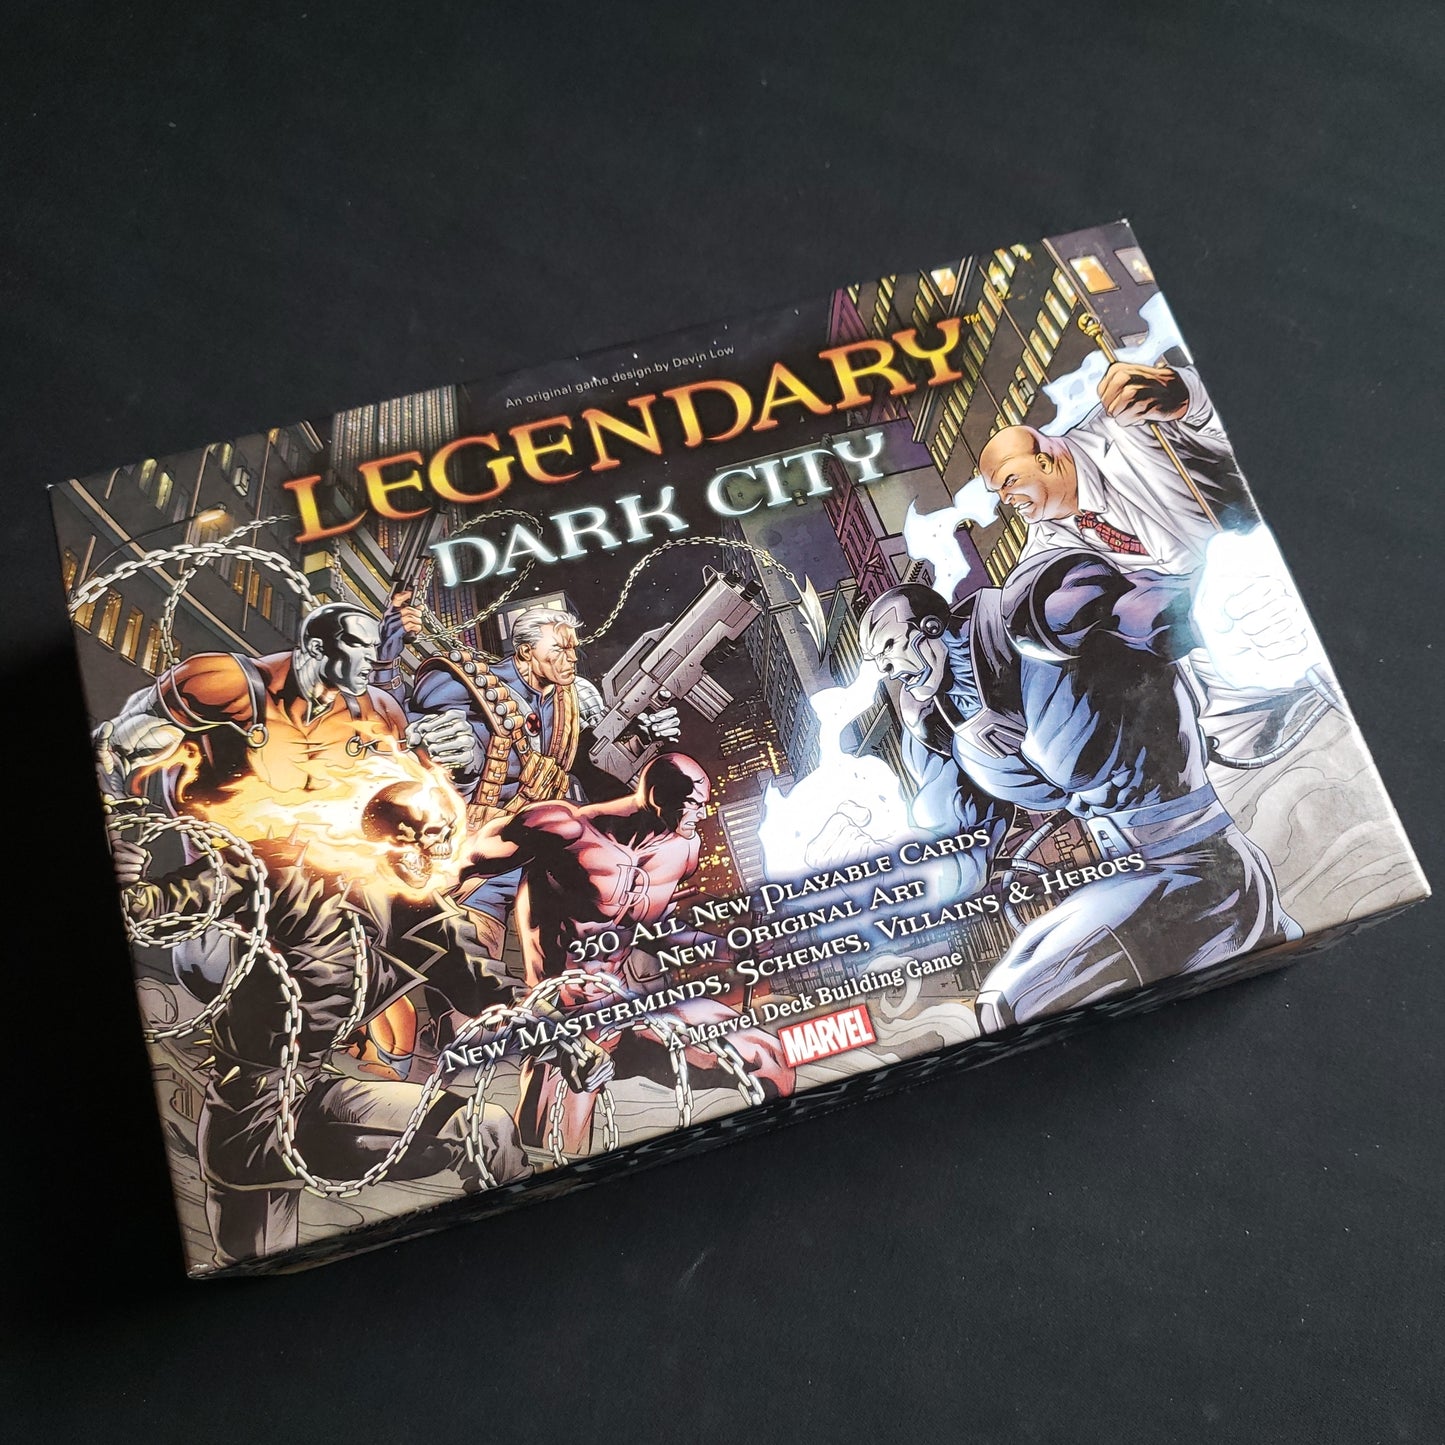 Image shows the front of the box for the Dark City Expansion for the Legendary Marvel card game